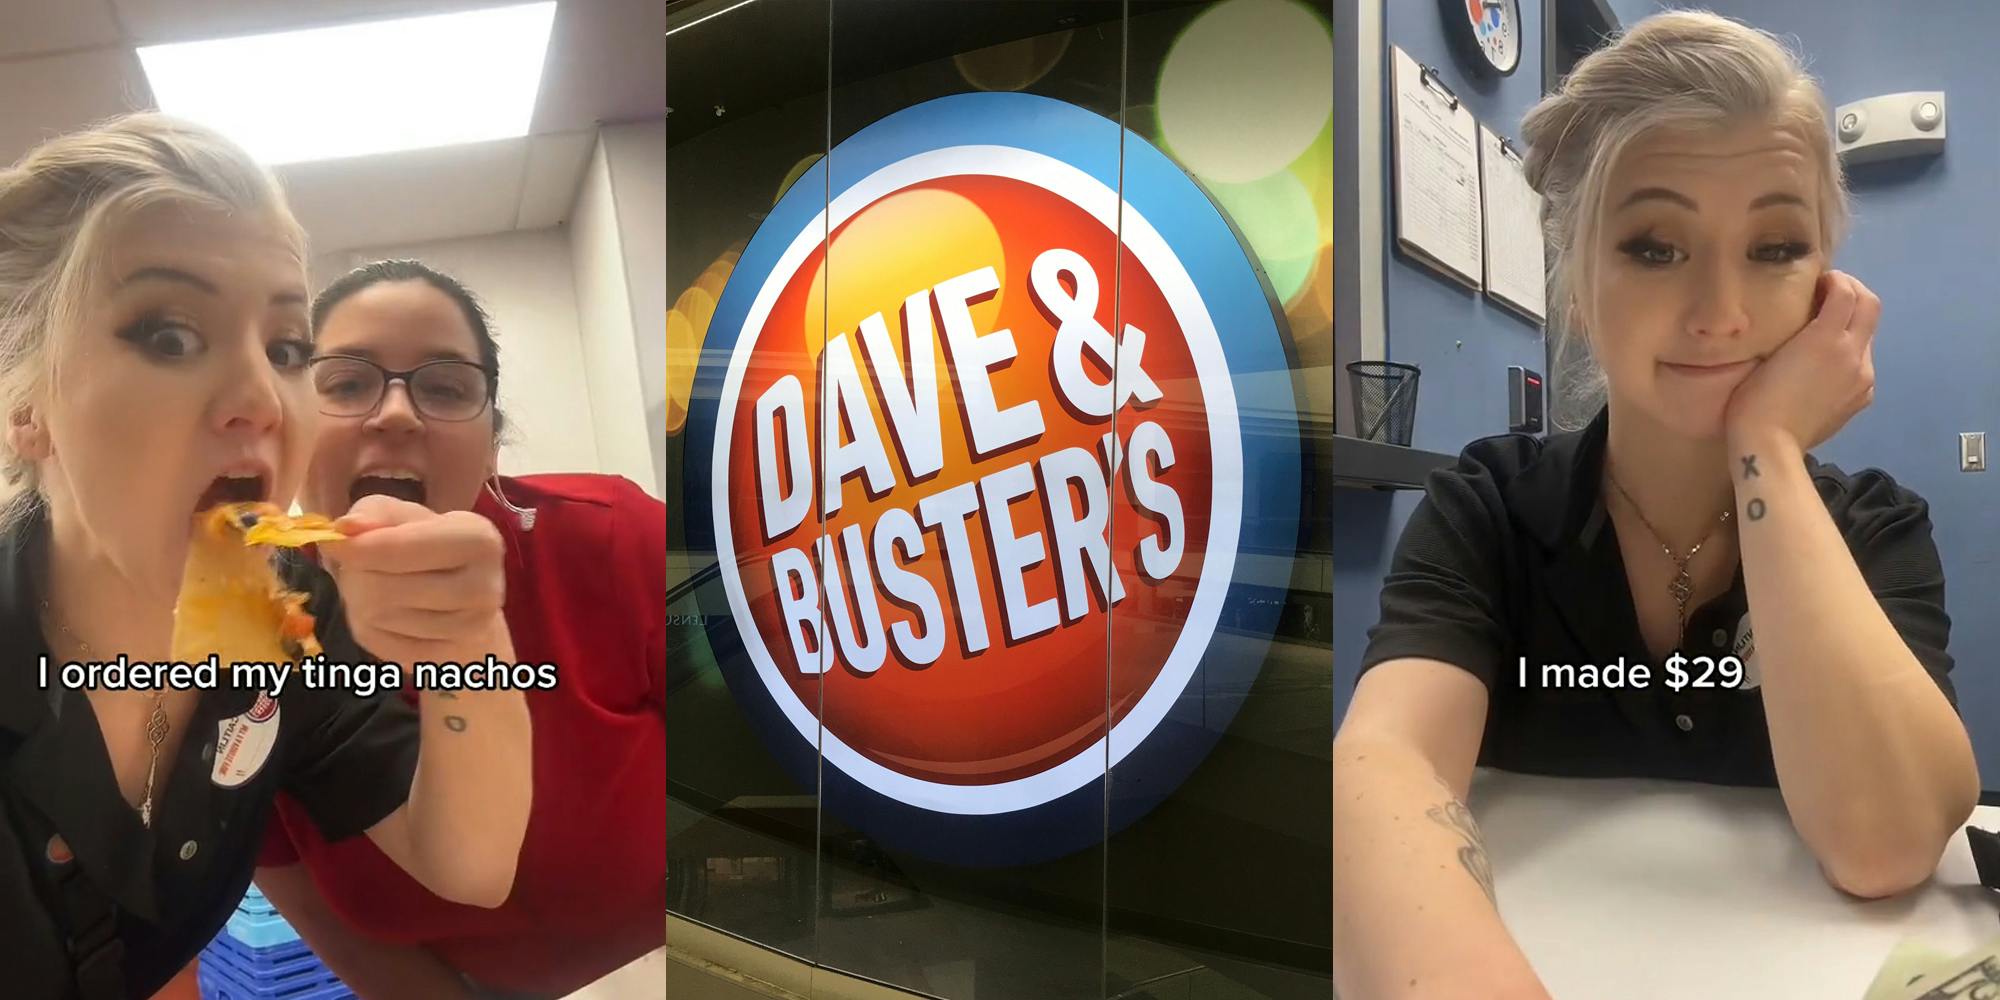 Dave & Buster's server eating nachos with caption "I ordered my tinga nachos" (l) Dave & Buster's sign in glass display (c) Dave & Buster's server with cash and caption "I made $29" (r)